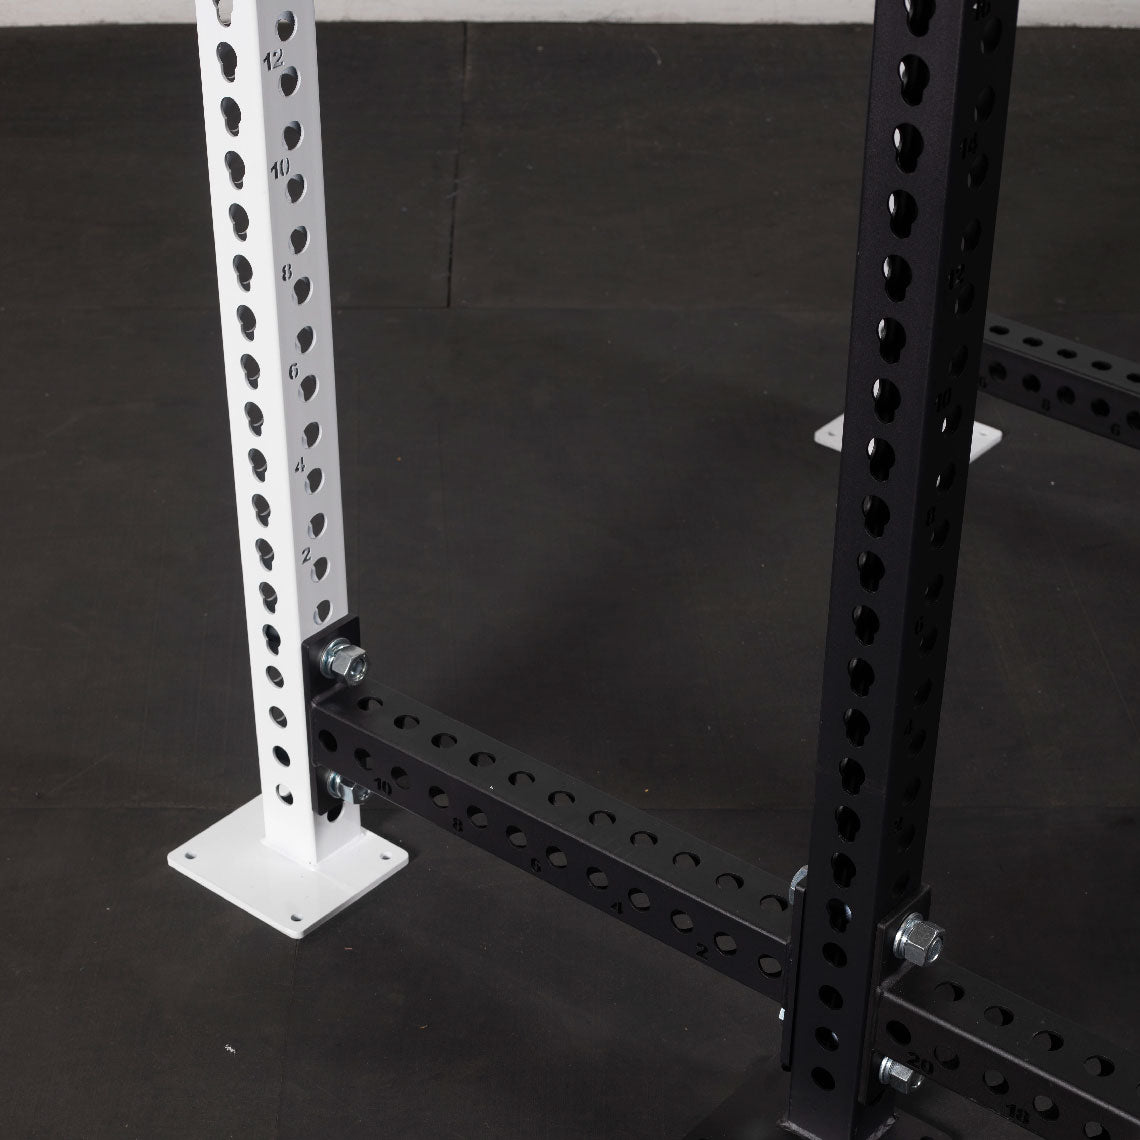 TITAN Series 24" Extension Kit - Extension Color: White - Extension Height: 100" - Crossmember: 1.25" Pull-Up Bar | White / 100" / 1.25" Pull-Up Bar